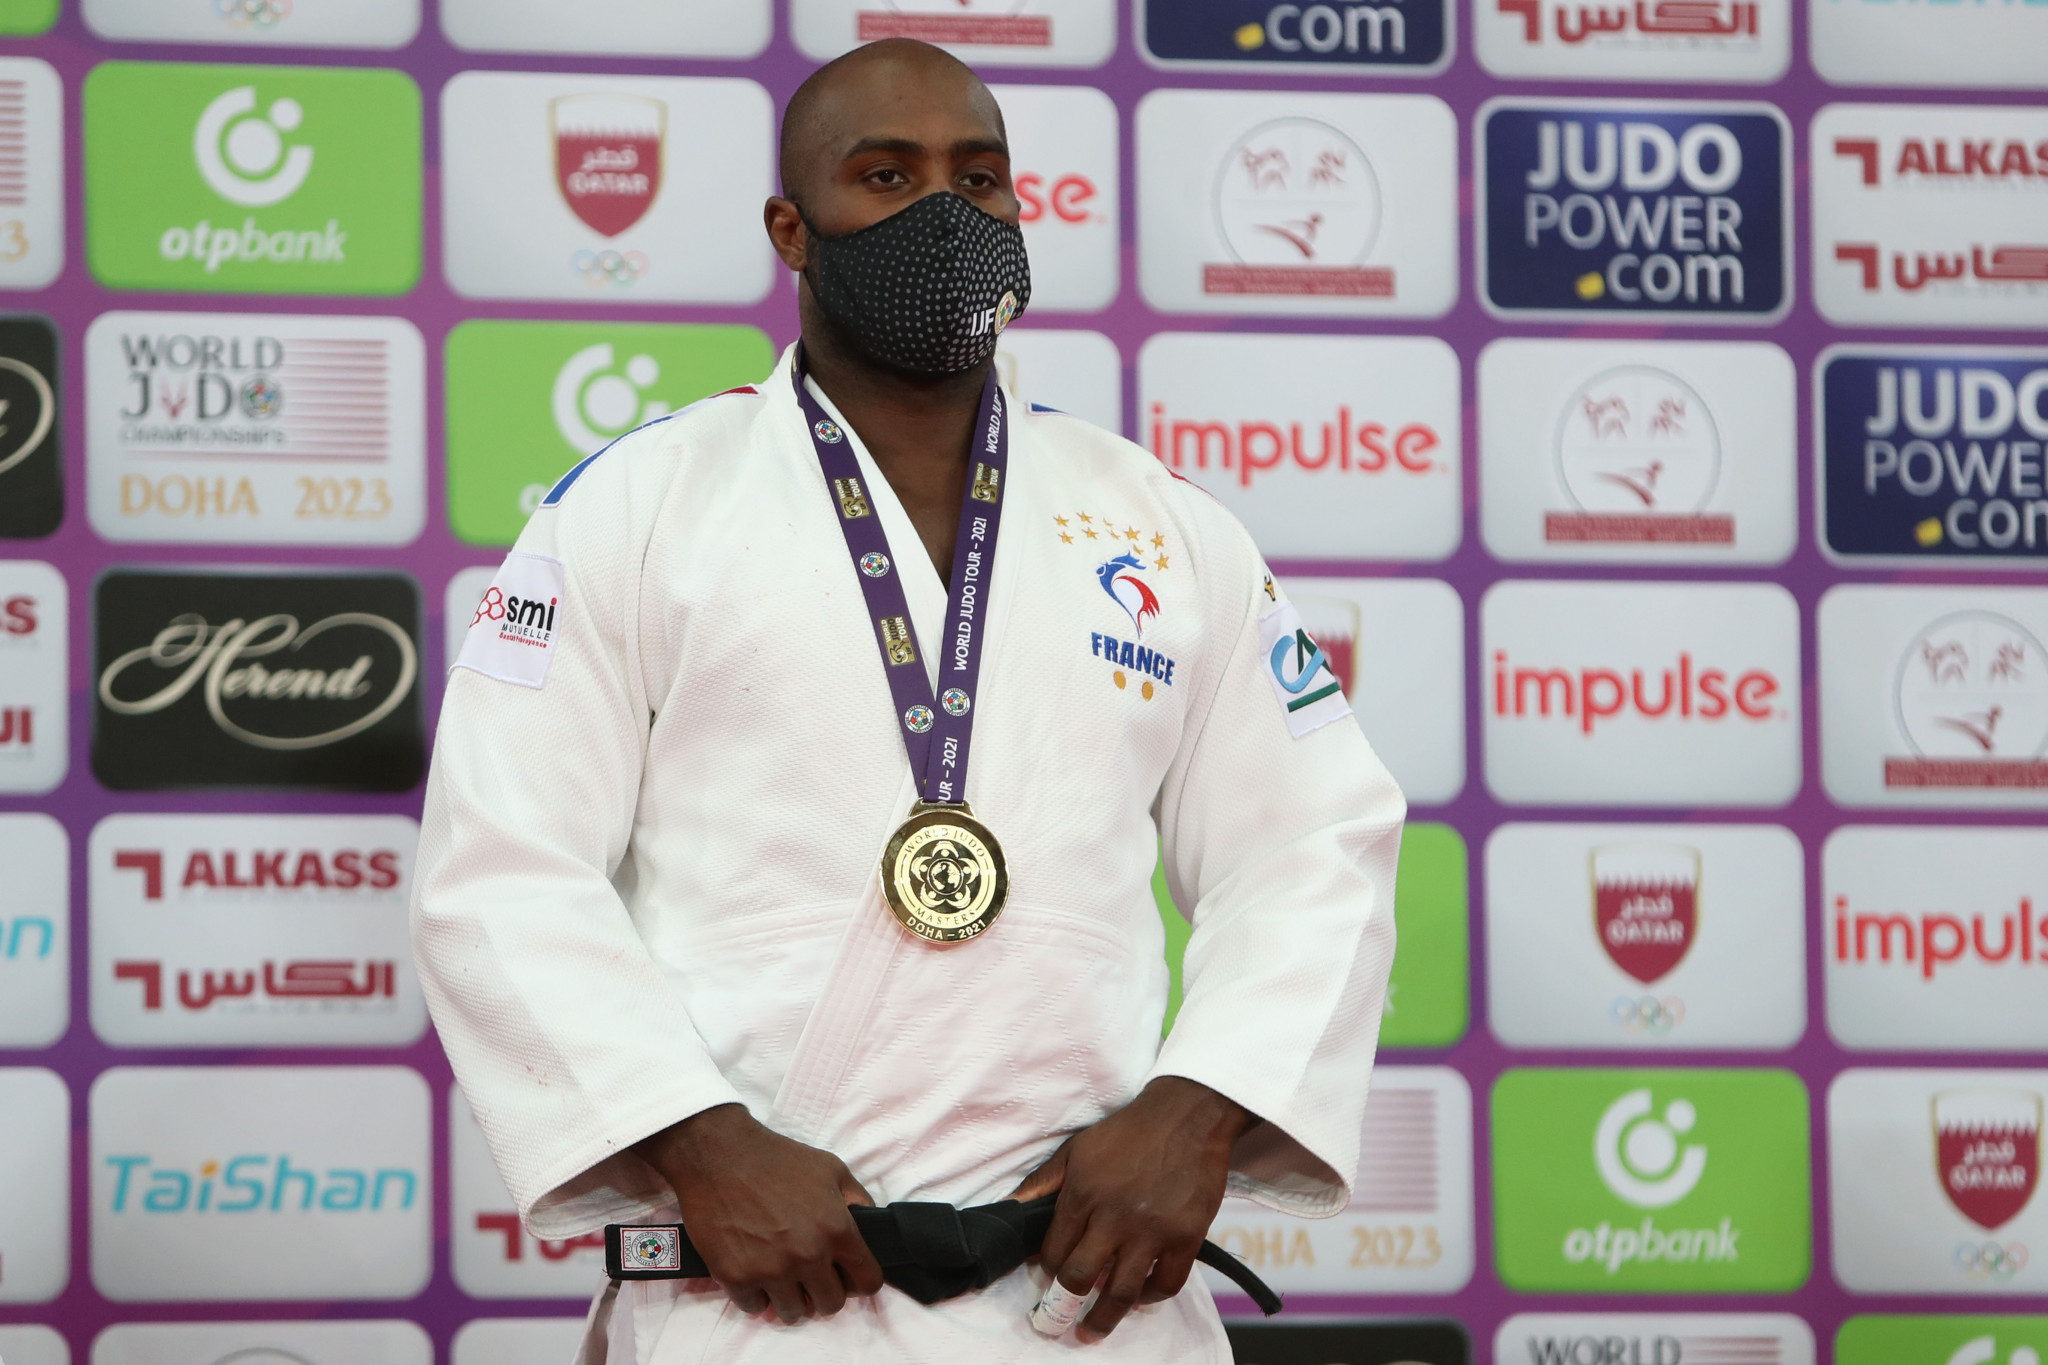 Riner brings IJF World Judo Masters to conclusion with heavyweight gold medal